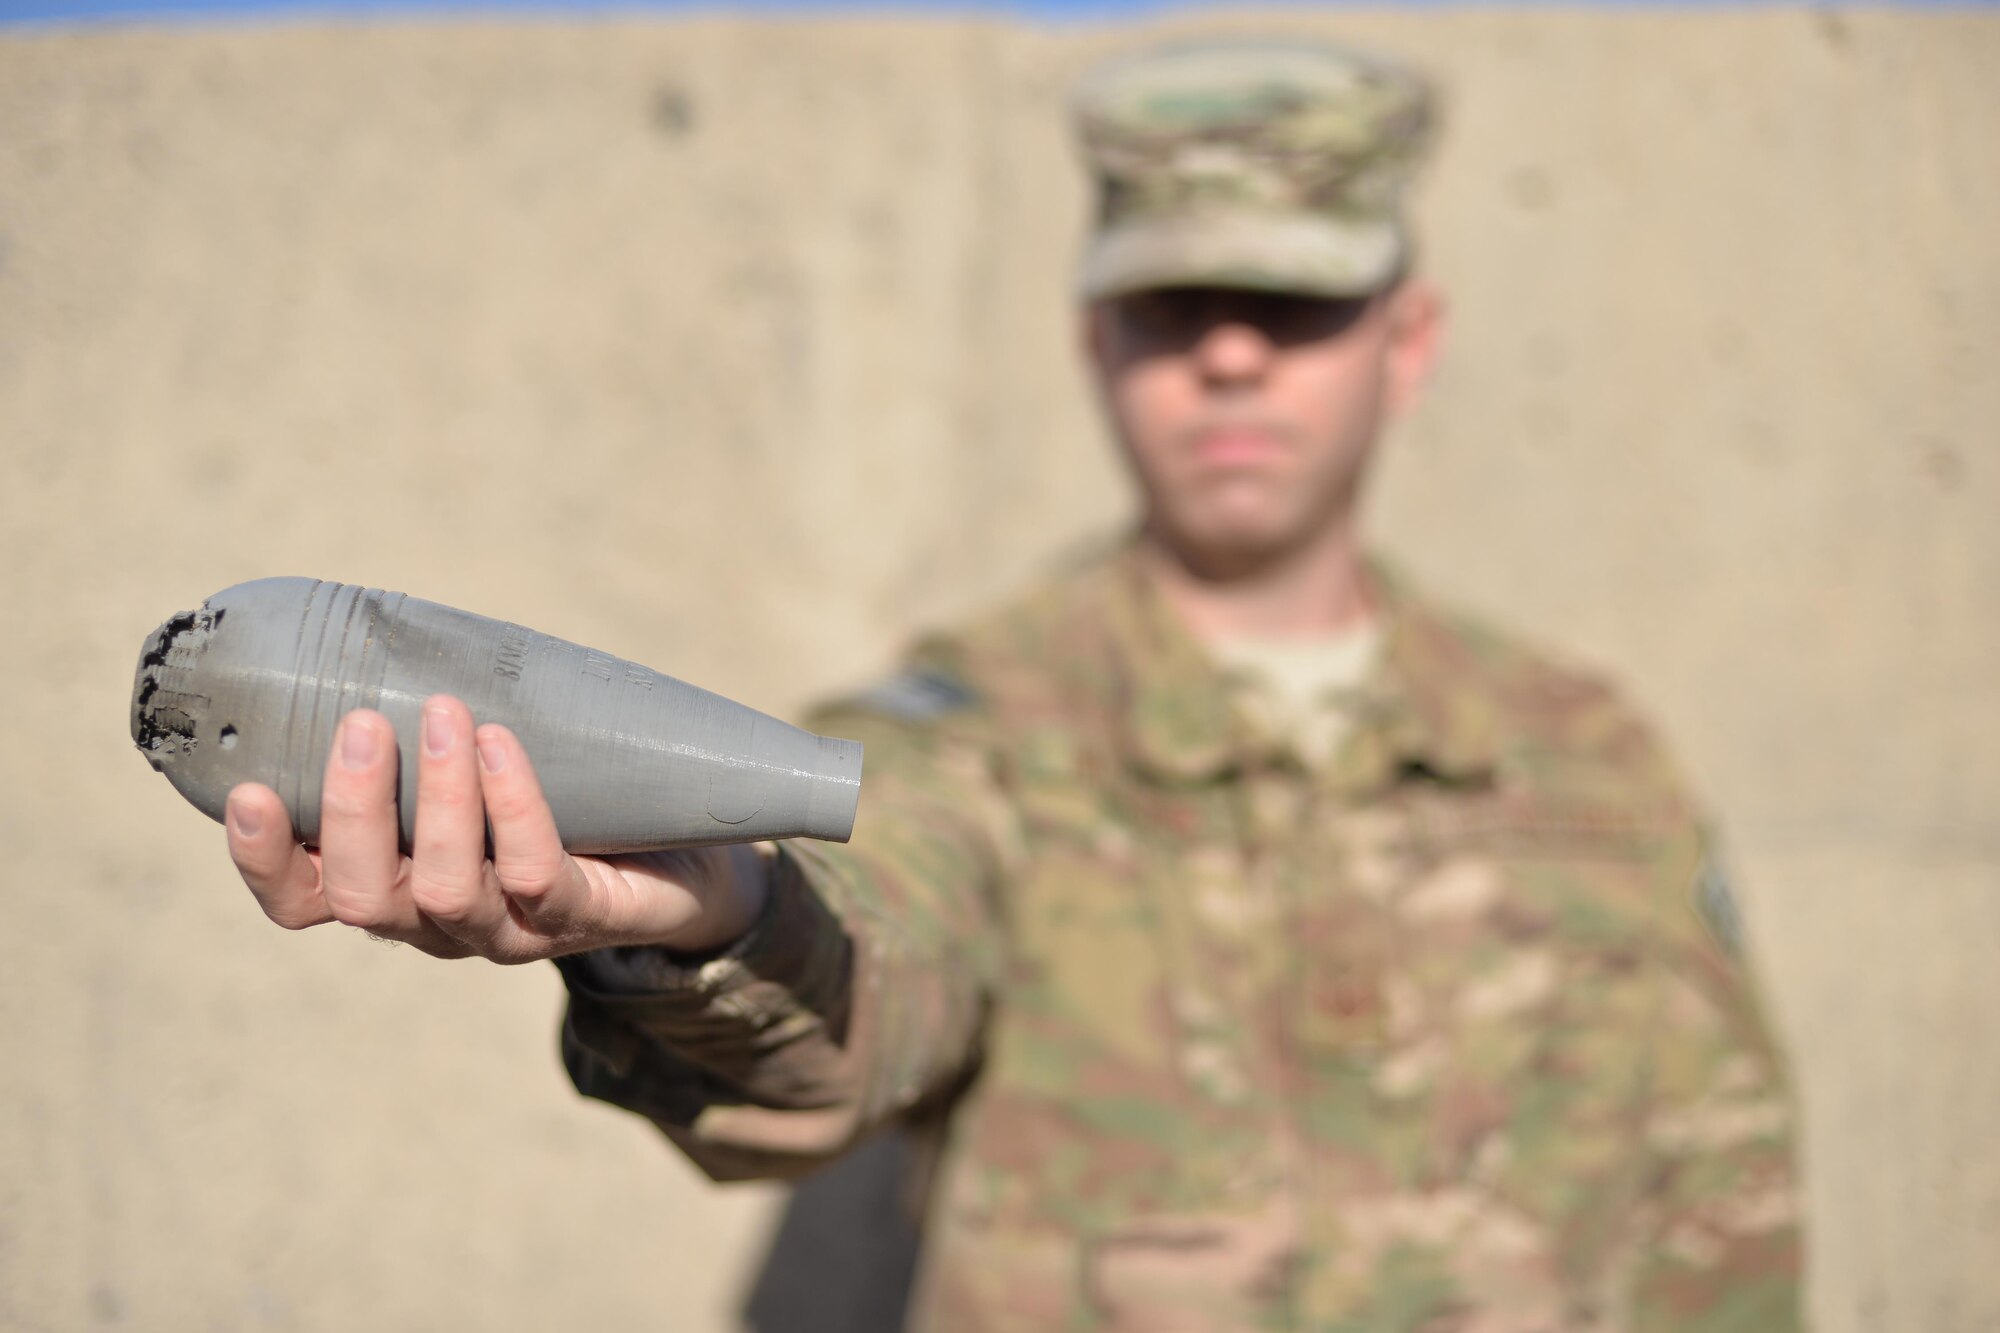 Tech. Sgt. Paul Willson, 341st Civil Engineer Squadron explosive ordnance disposal NCO in charge of quality assurance, holds a 3-D printed mortar after a render safe training procedure was conducted Nov. 21, 2016, at Malmstrom Air Force Base, Mont. The EOD team is now using a 3-D printer to produce training aids that allow for realistic training without having to preserve them for future training. The training aids can now be made at a low cost, allowing more practical training and saving the unit hundreds to thousands of dollars each year. (U.S. Air Force photo/Airman 1st Class Daniel Brosam)